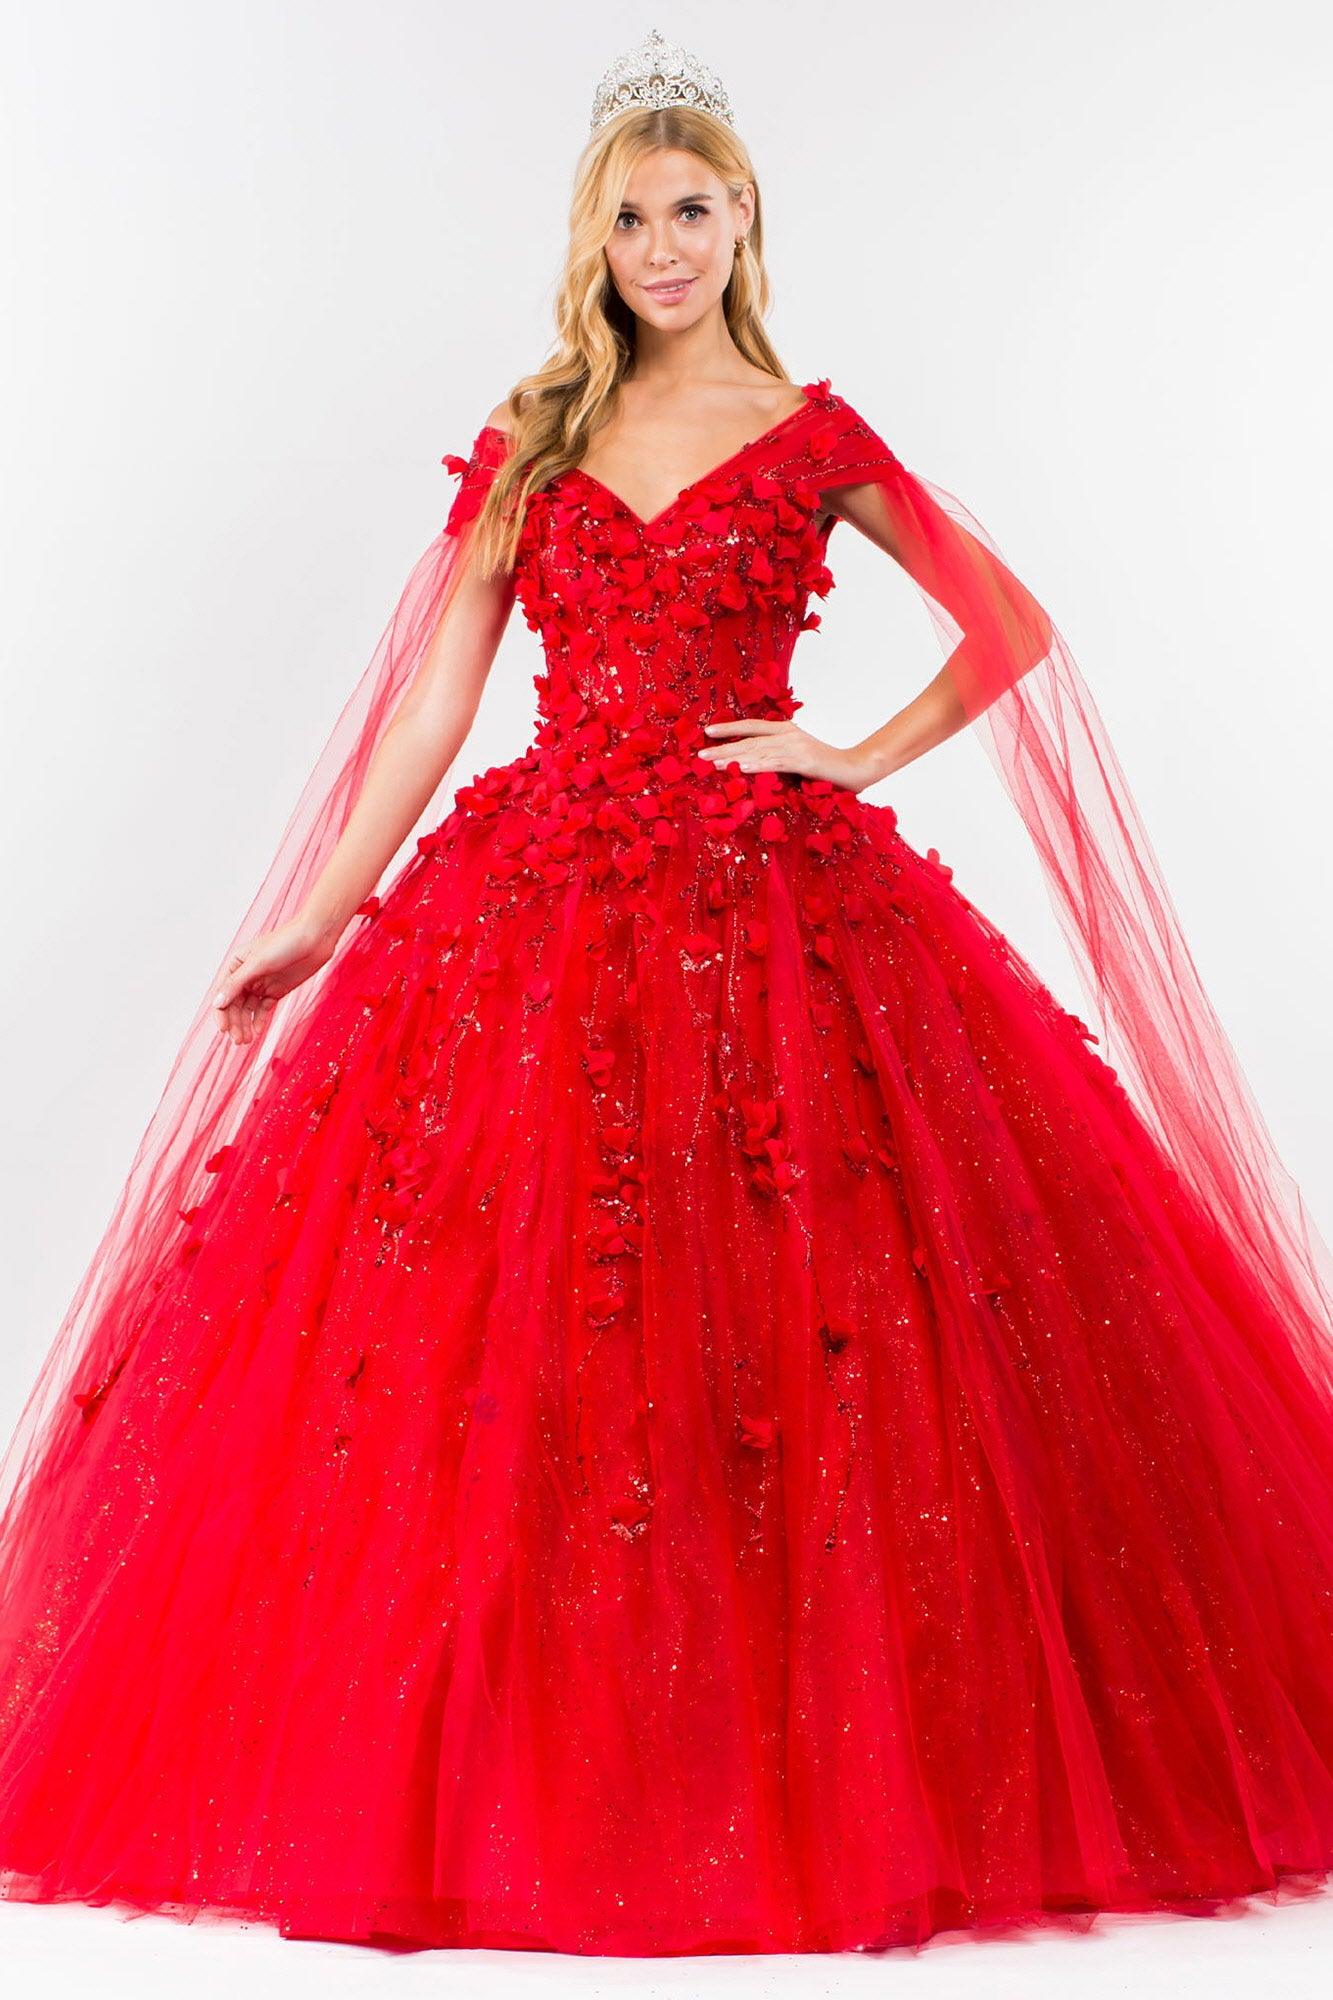 Quinceanera Sweet 16 Long Mesh Gown - The Dress Outlet